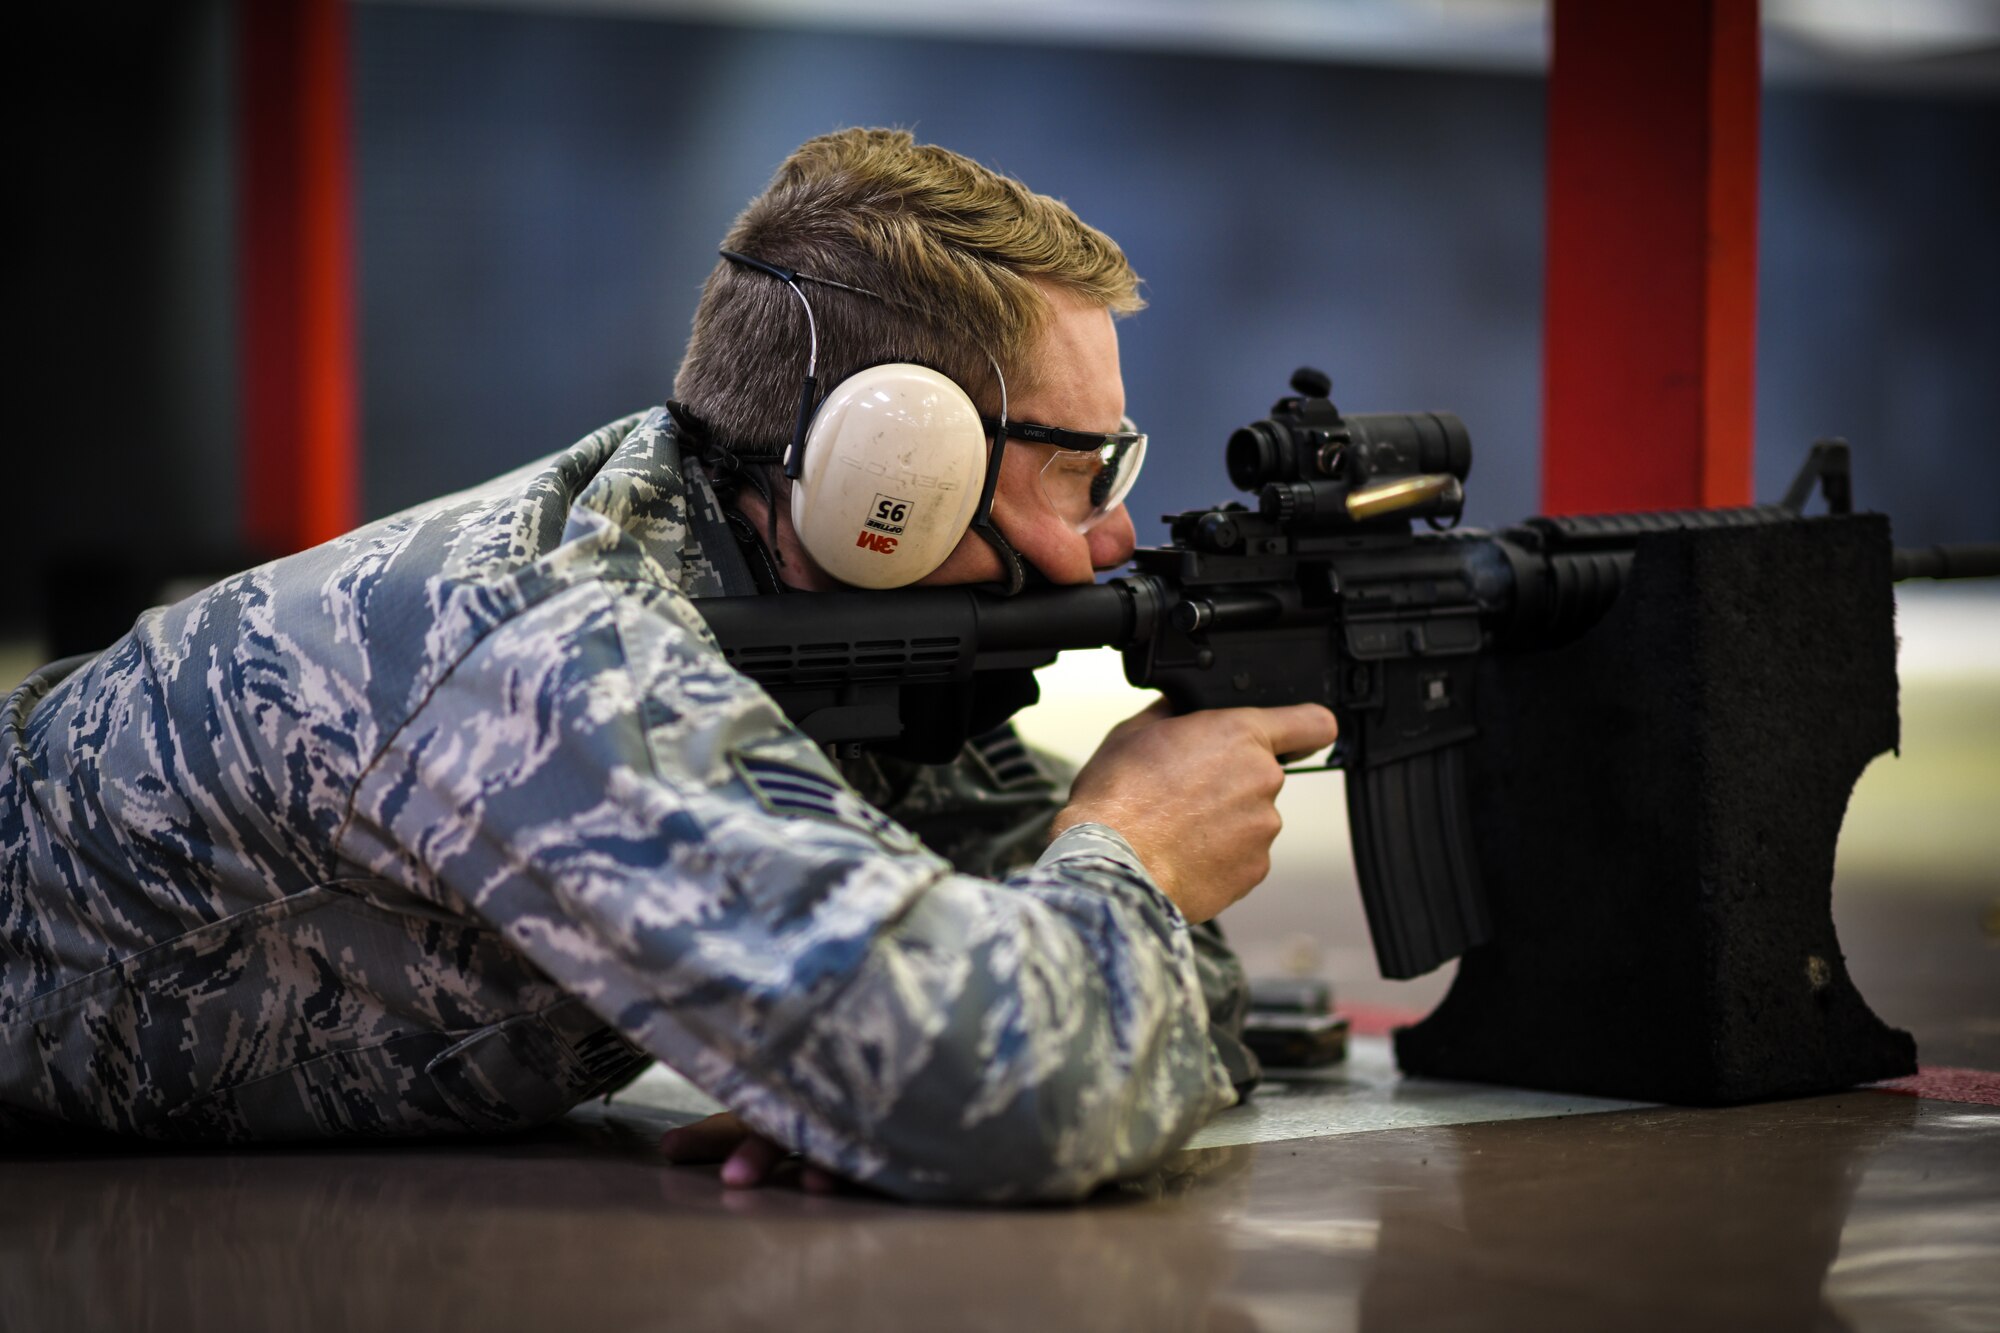 Senior Airman Brandon Martinez, a biomedical equipment specialist with the 910th Medical Squadron, shoots an M-4 carbine downrange at the Combat Arms Training and Maintenance firing range, August 1, 2020, Youngstown Air Reserve Station, Ohio. Medical professionals are required to qualify in combat arms every 36 months to remain mission ready.